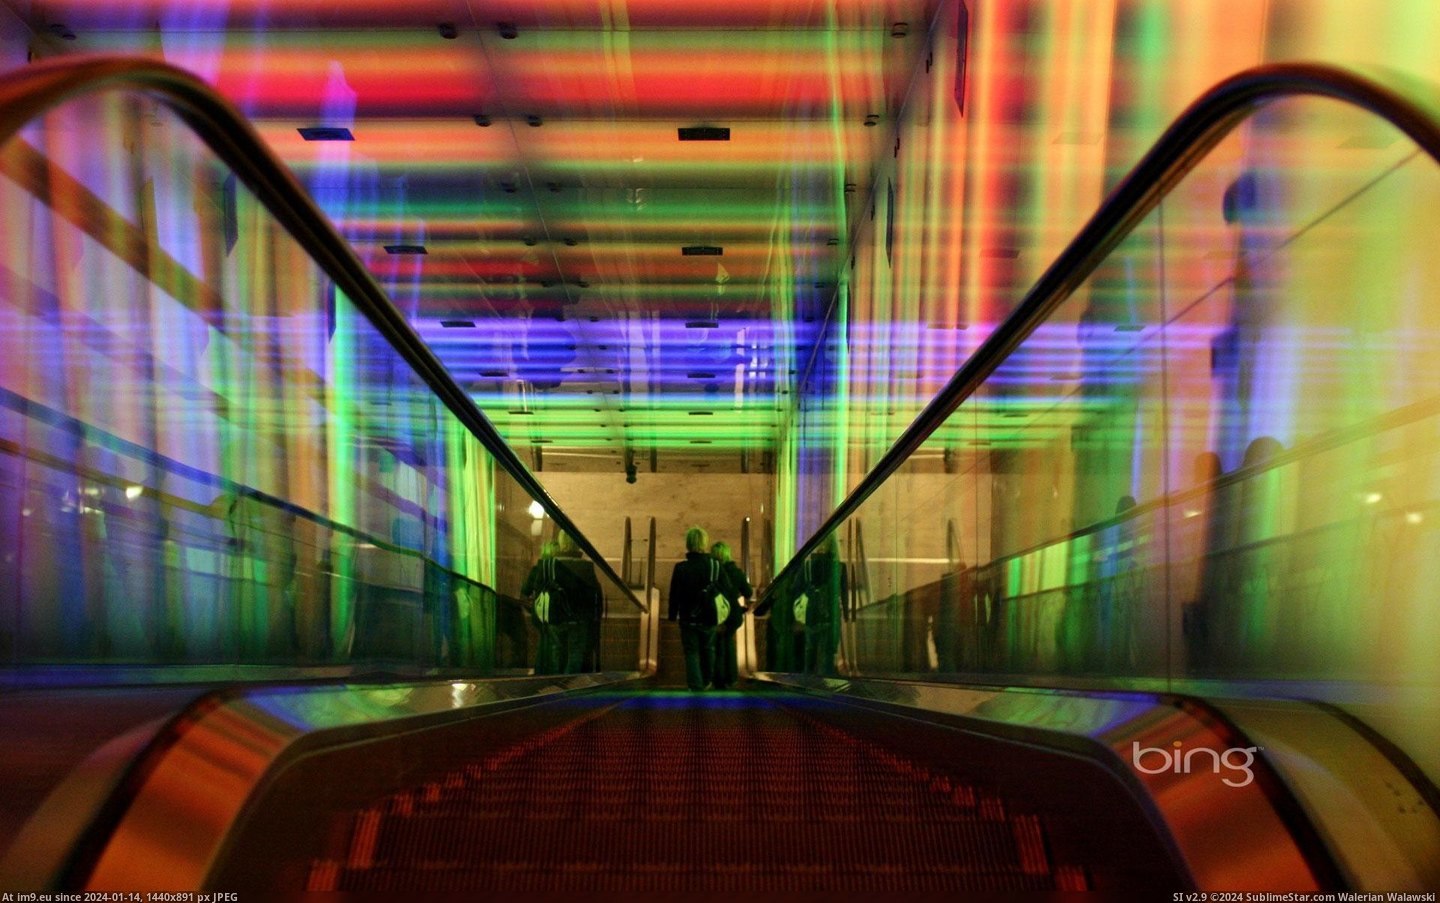 Escalator through the 'Tunnel of Light' installation at the Nydalen Metro Station in Oslo, Norway (in Bing Photos November 2012)